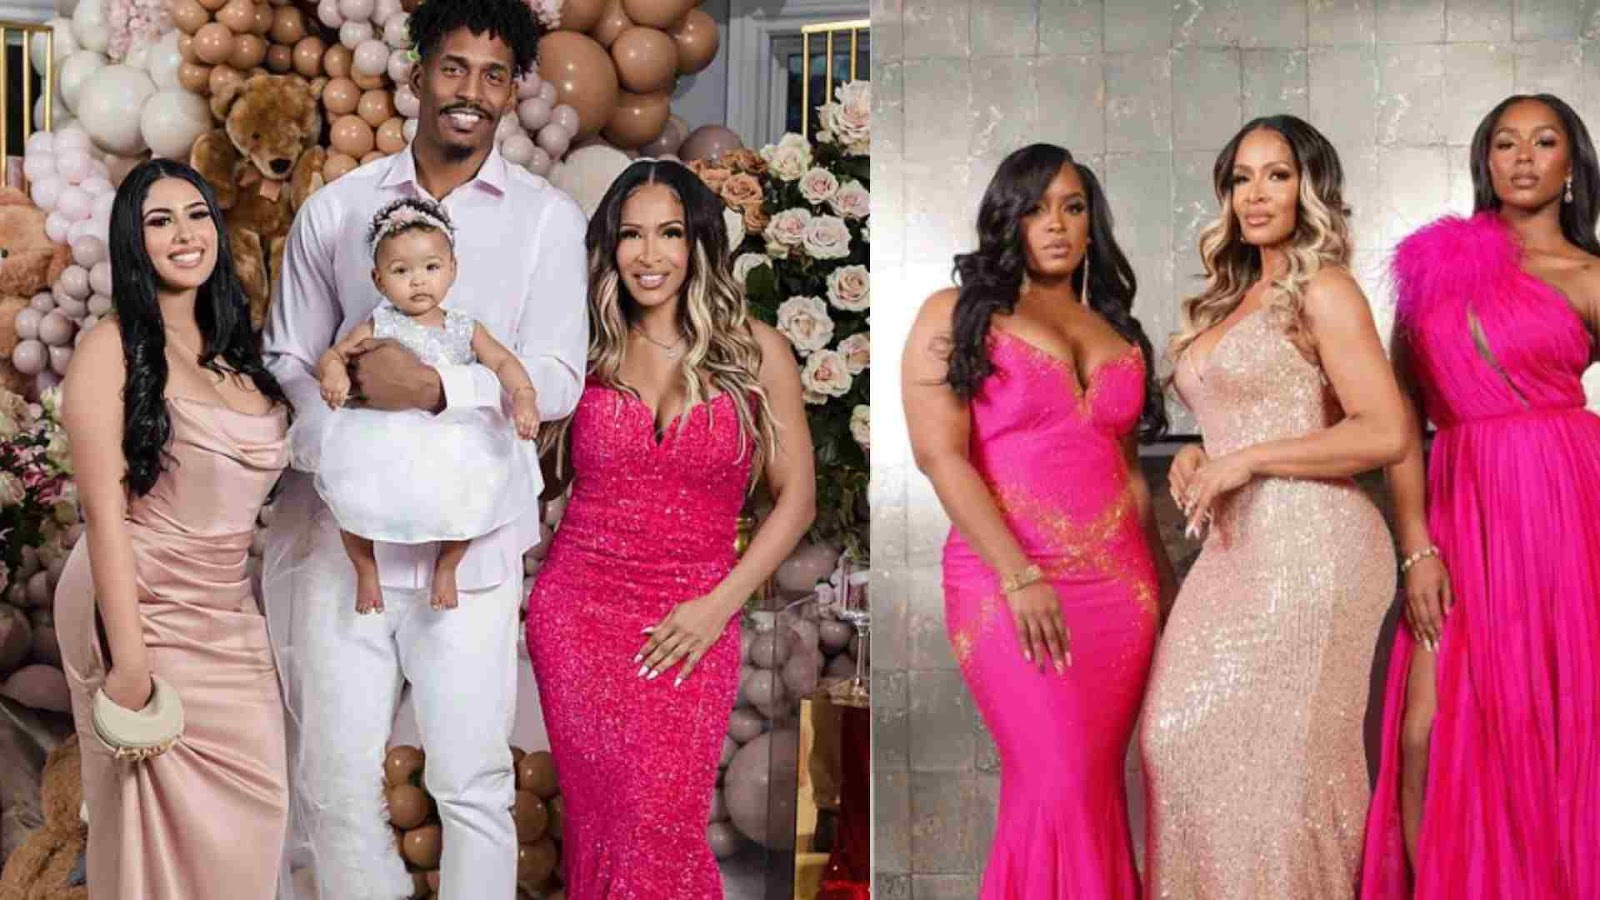 Personal life of Sheree Whitfield